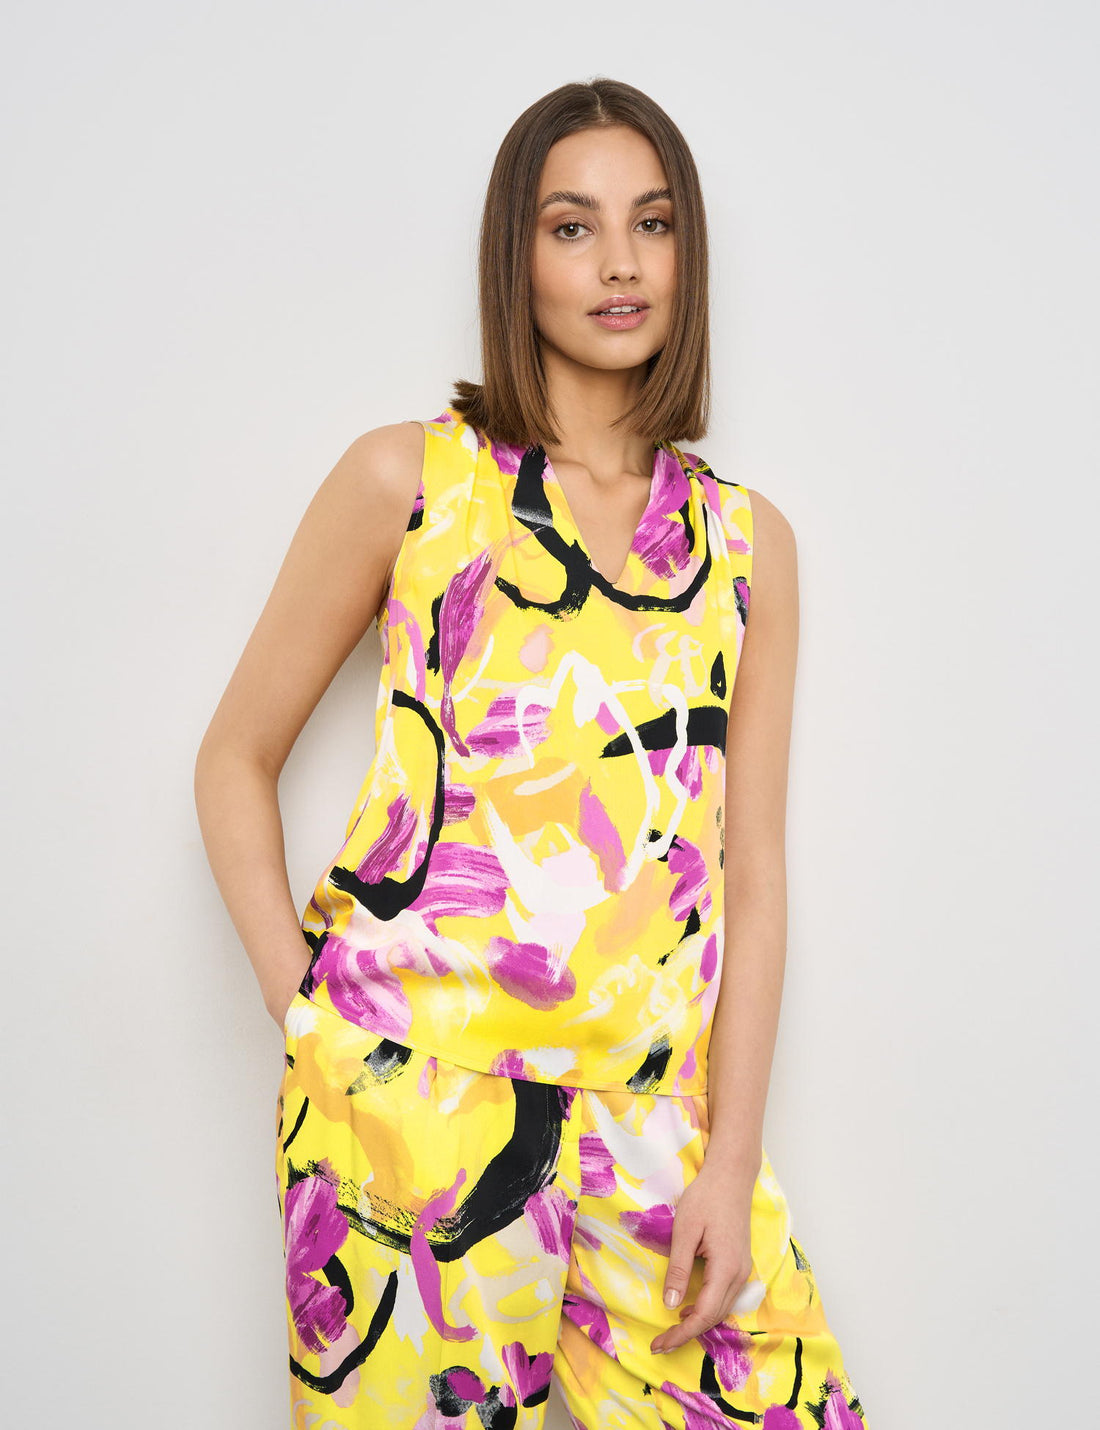 Sleeveless Blouse With A Floral Print_560313-11019_4142_01